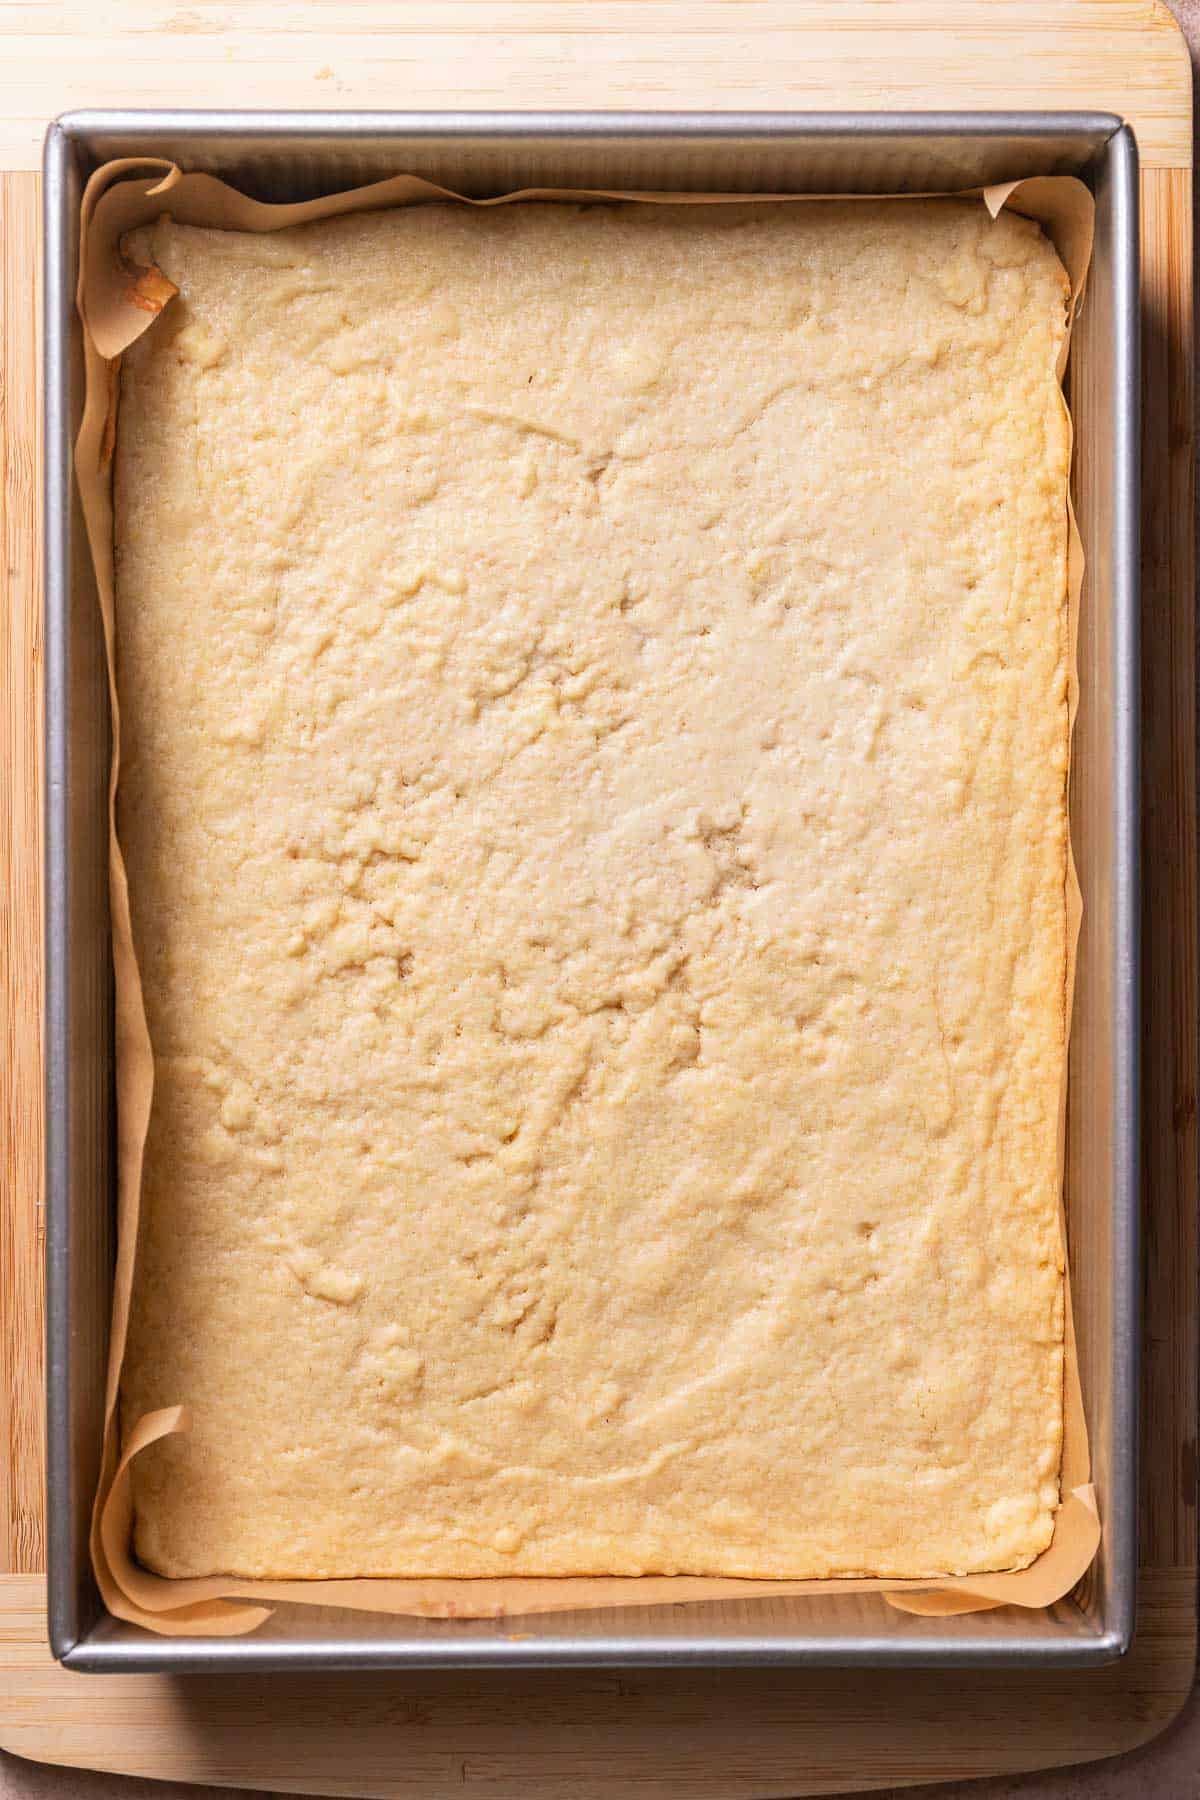 The baked sugar cookie bars in a baking pan.